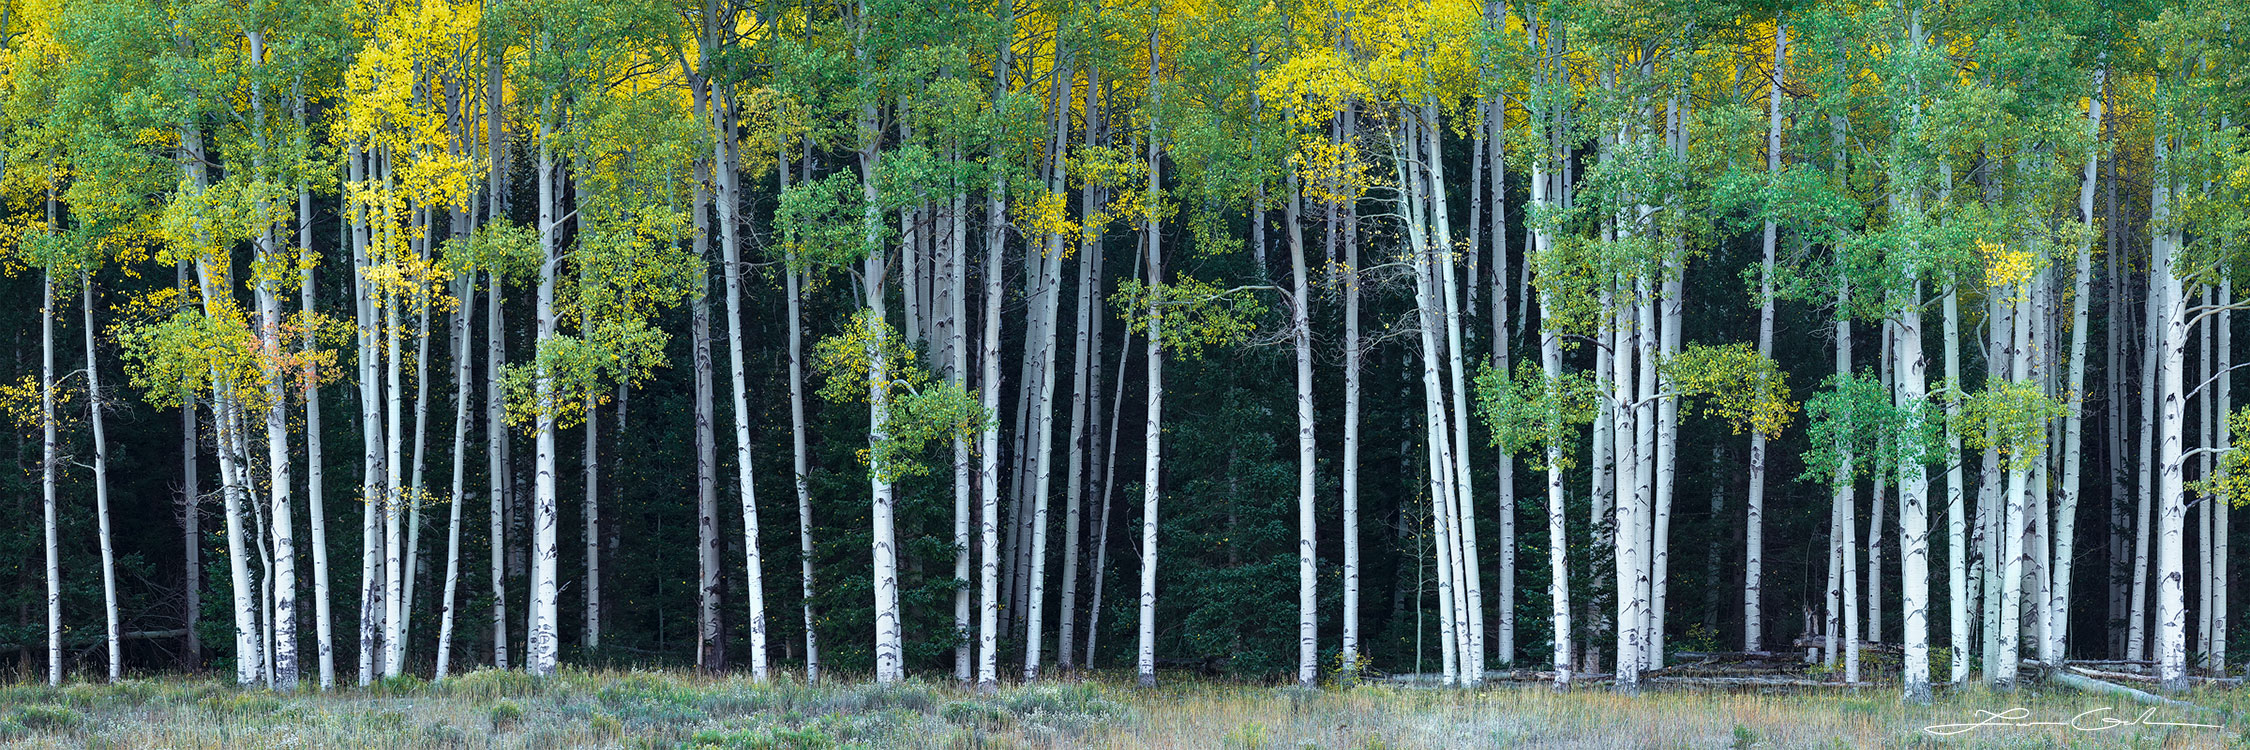 A beautiful row of aspen trees in front of a pine forest - Gintchin Fine Art